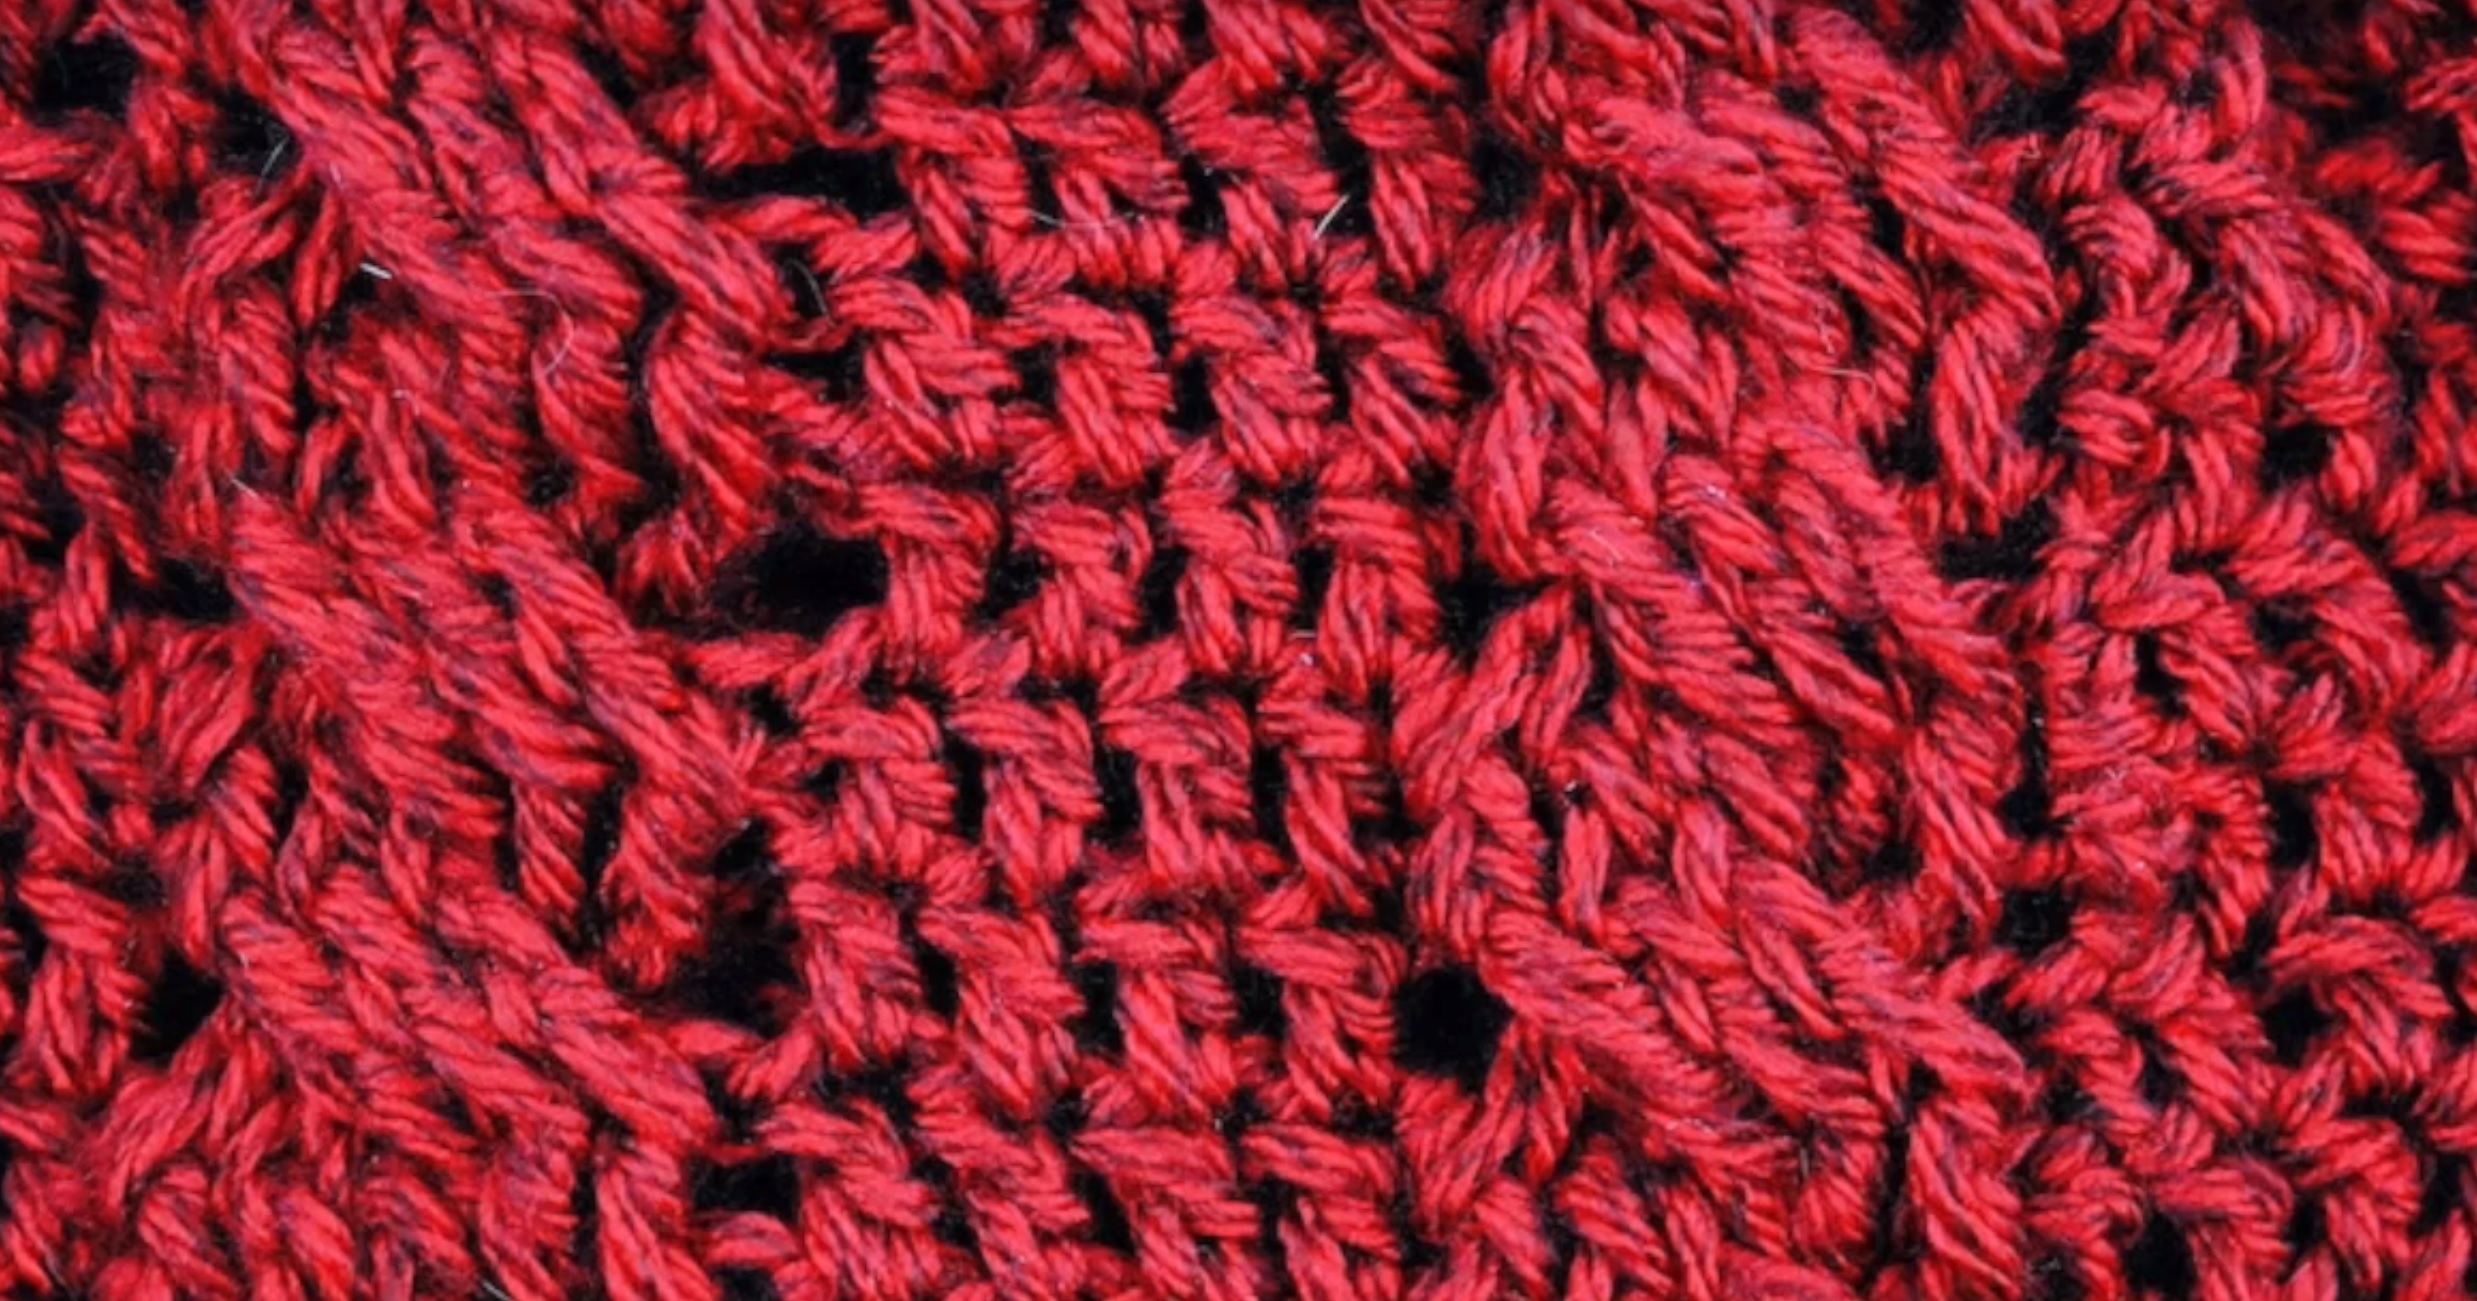 Perfect Crochet Cable Stitch Video Tutorial